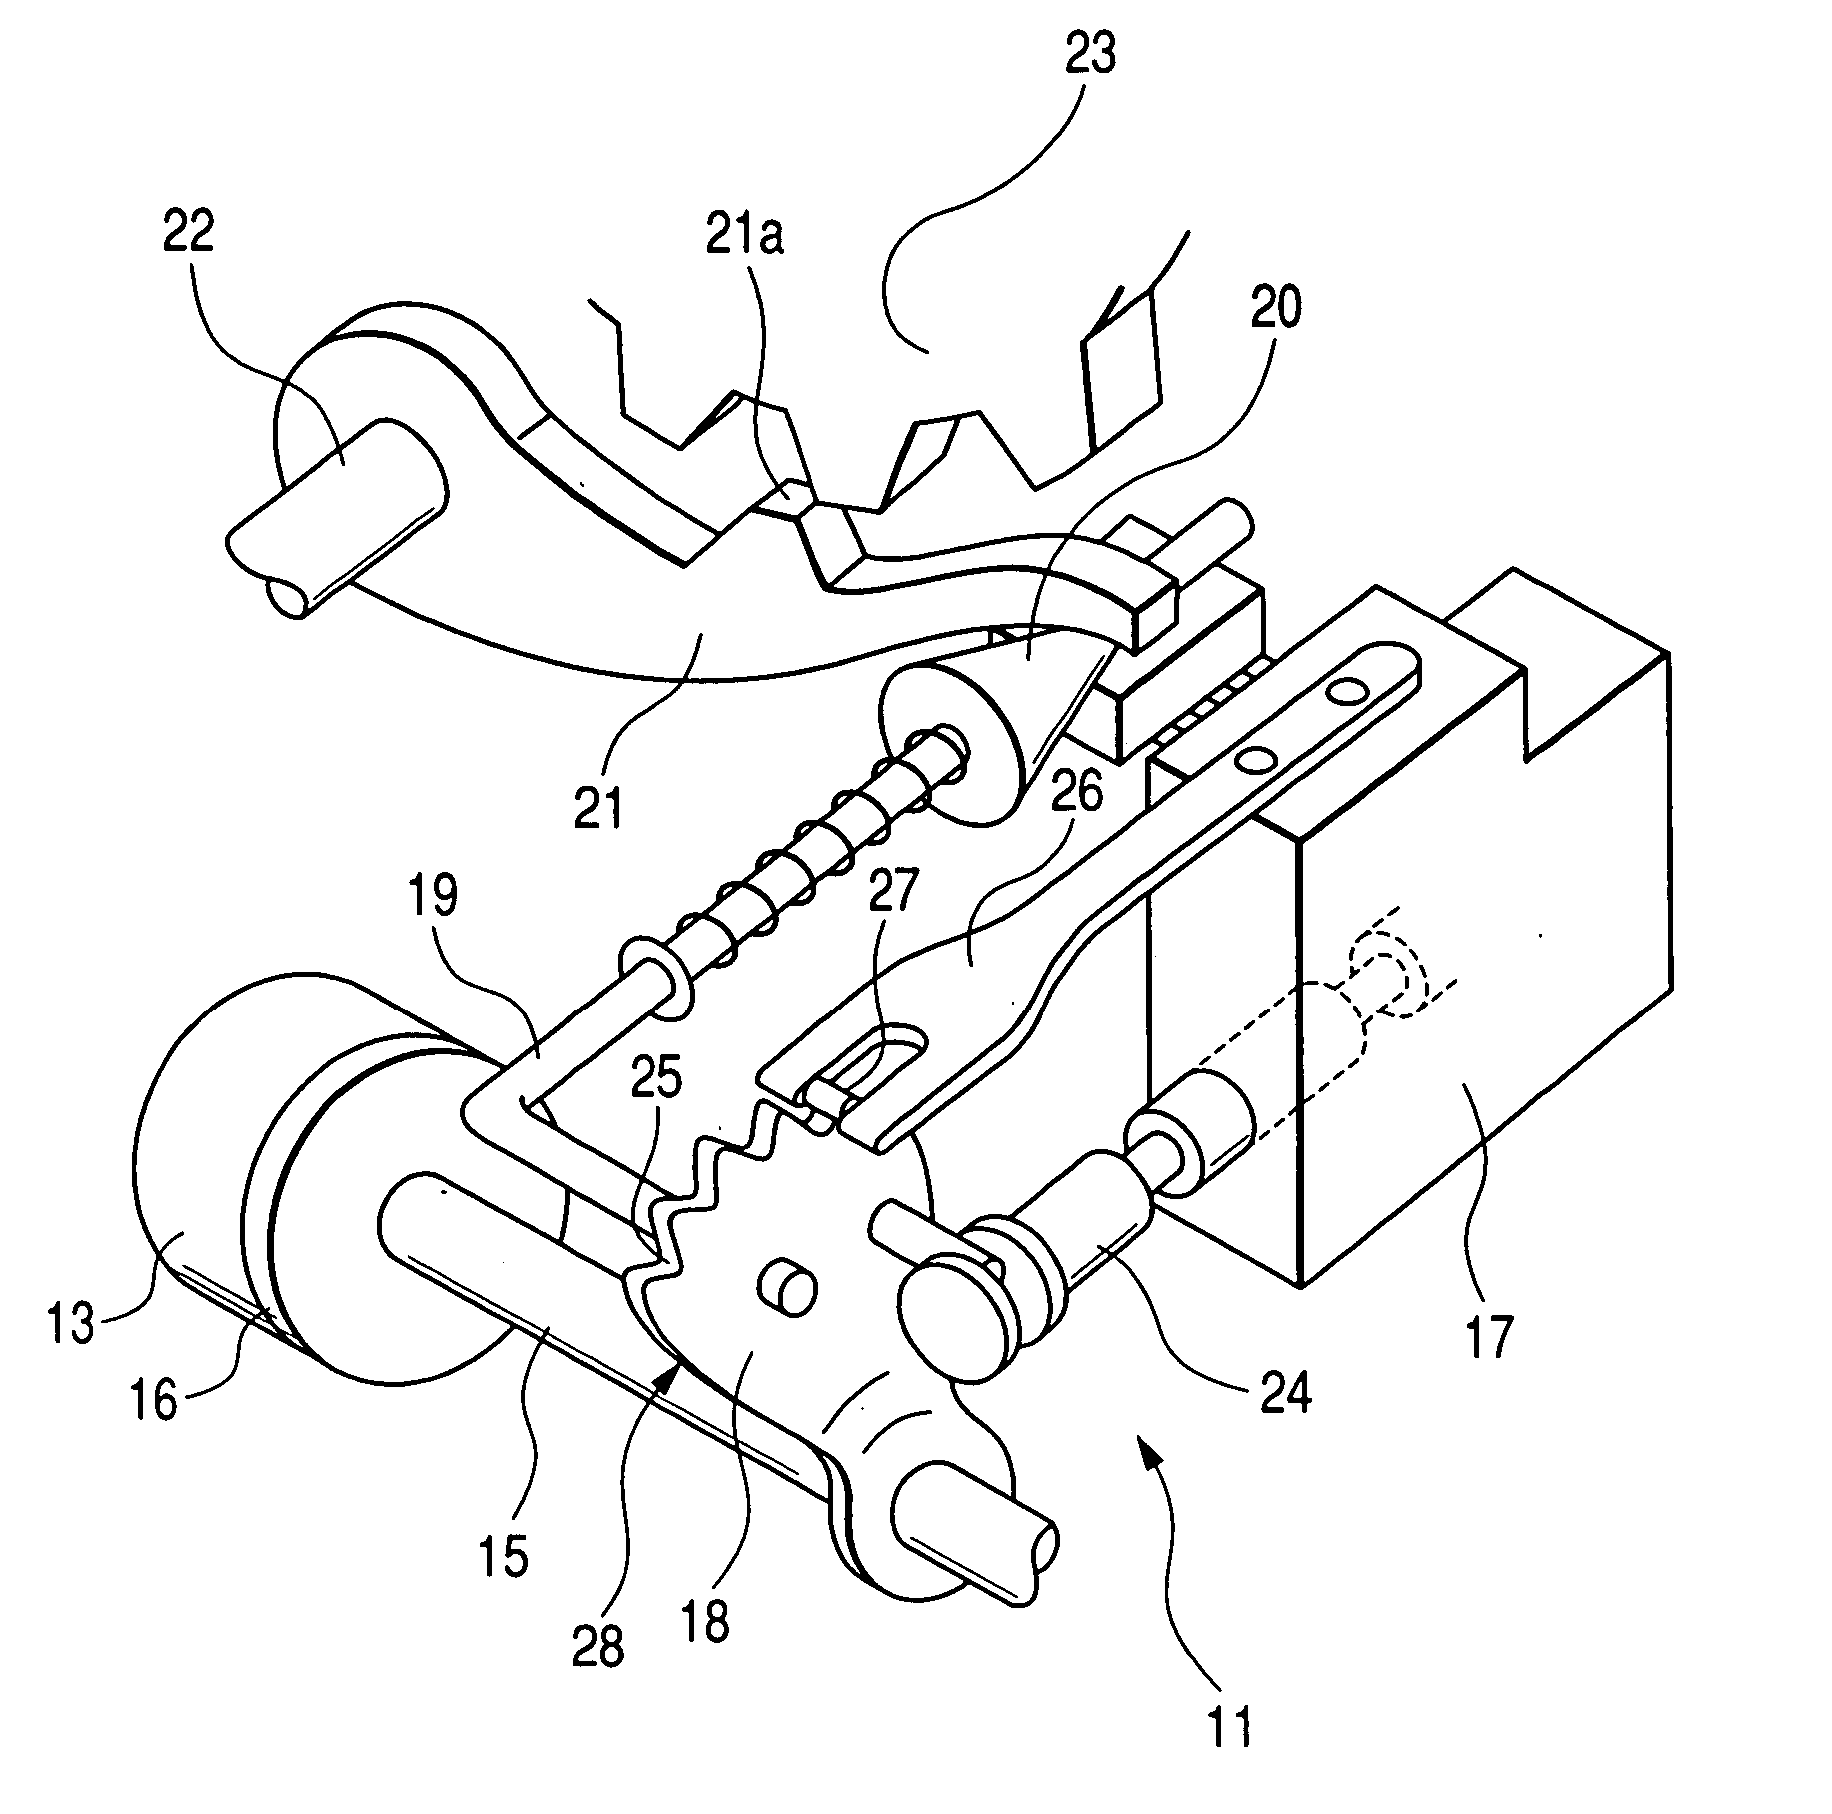 Position shift control apparatus ensuring durability and operation accuracy thereof